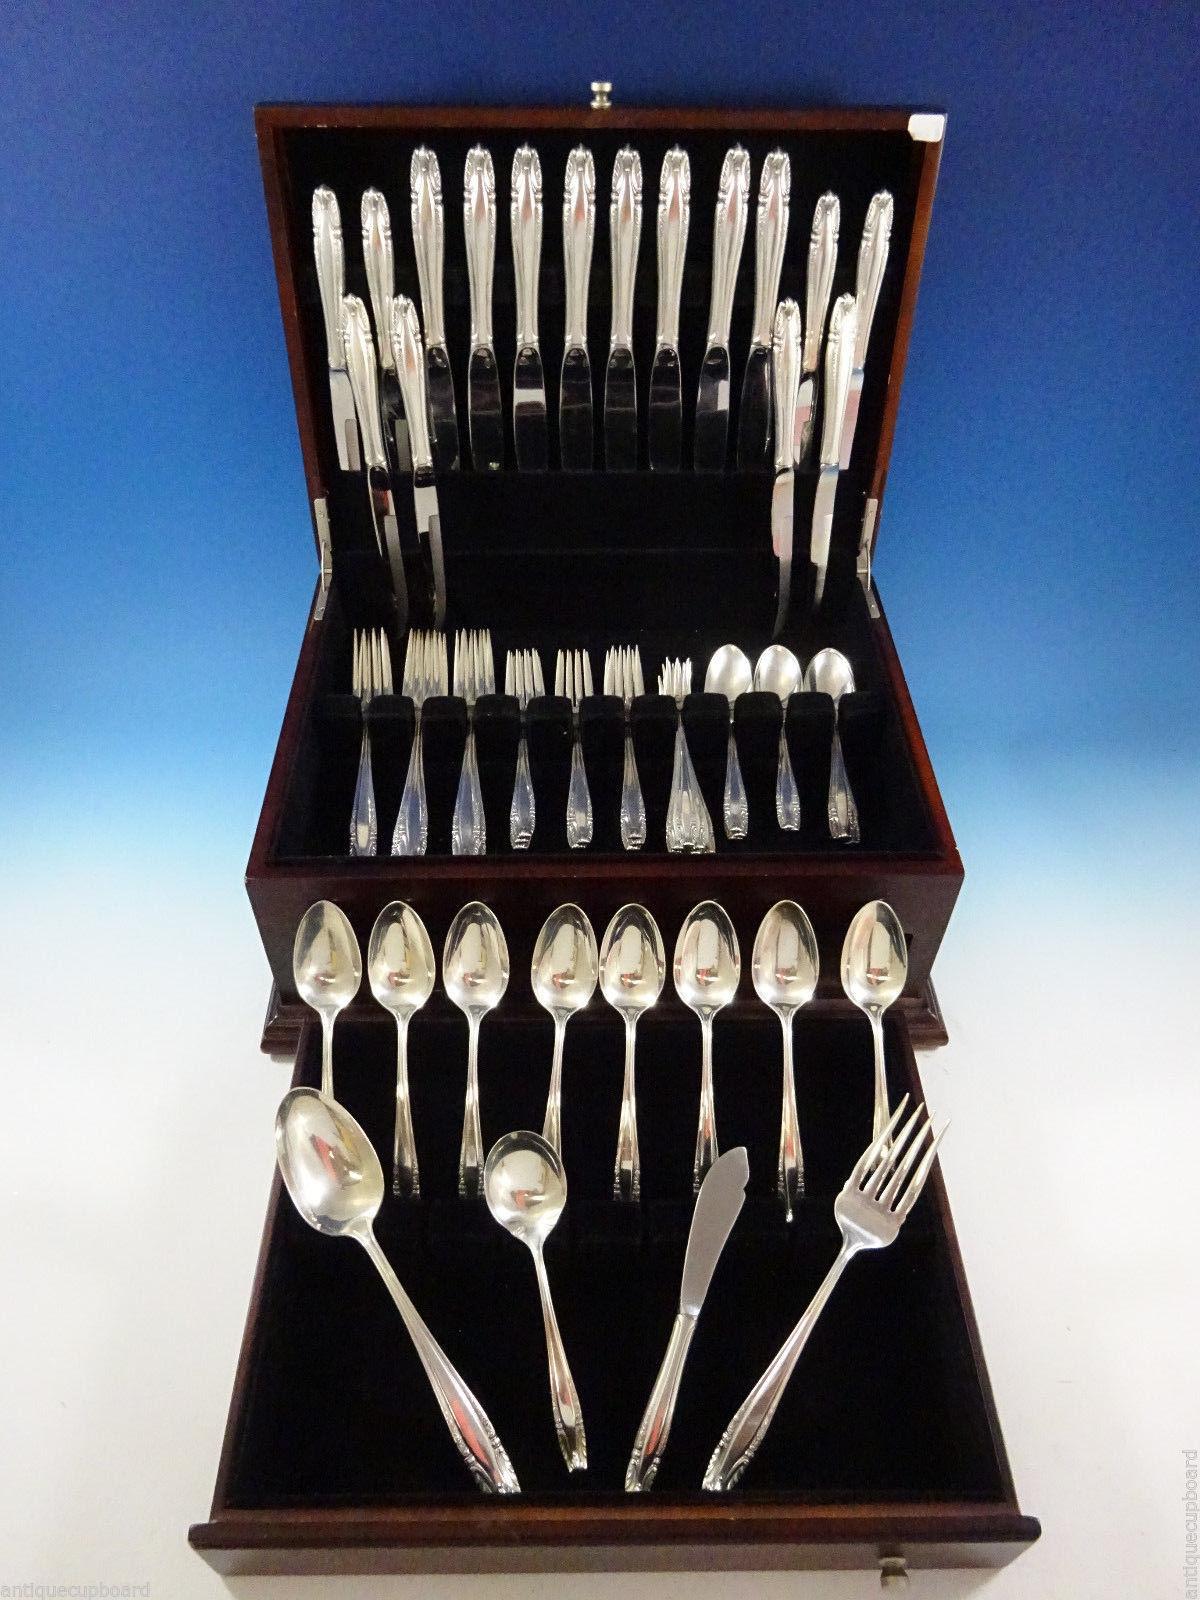 Stradivari by Wallace sterling silver dinner size flatware set, 60 pieces. This set includes:

8 dinner size knives, 9 3/4